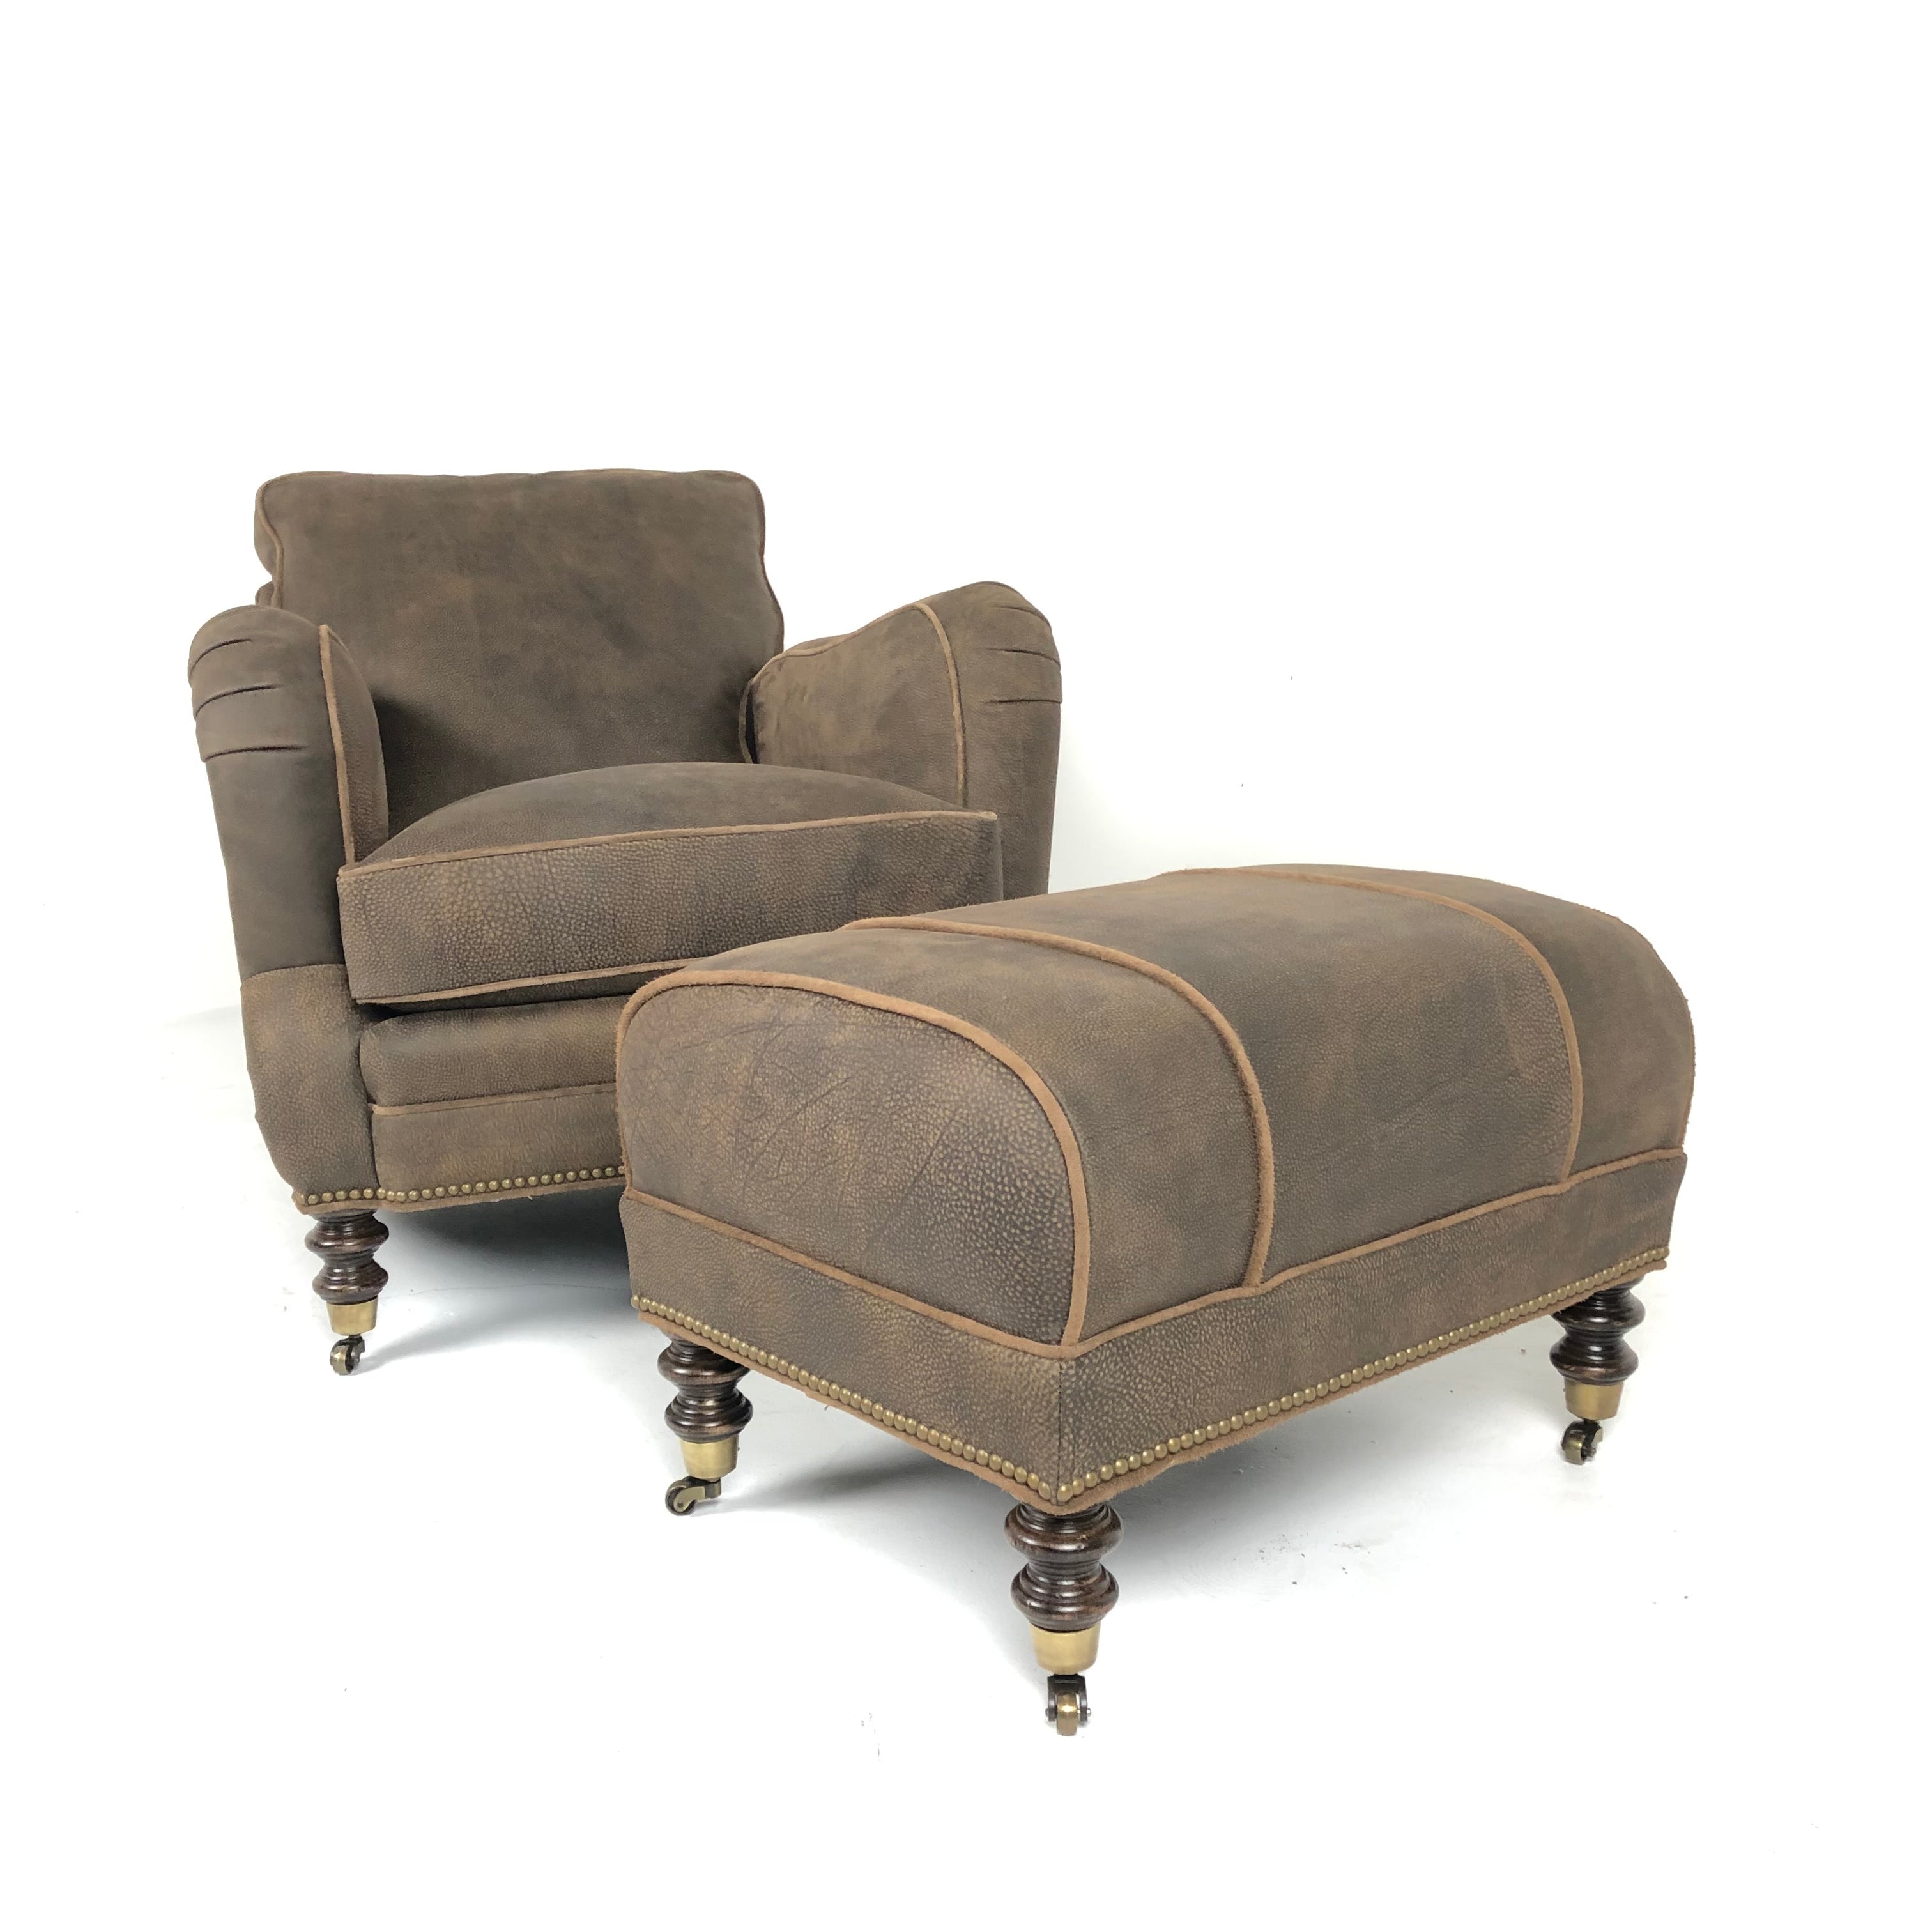 Cyrus Leather Tilt Back Chair & Ottoman by Wesley Hall shown in Zulu Chocolate leather - front view reclined